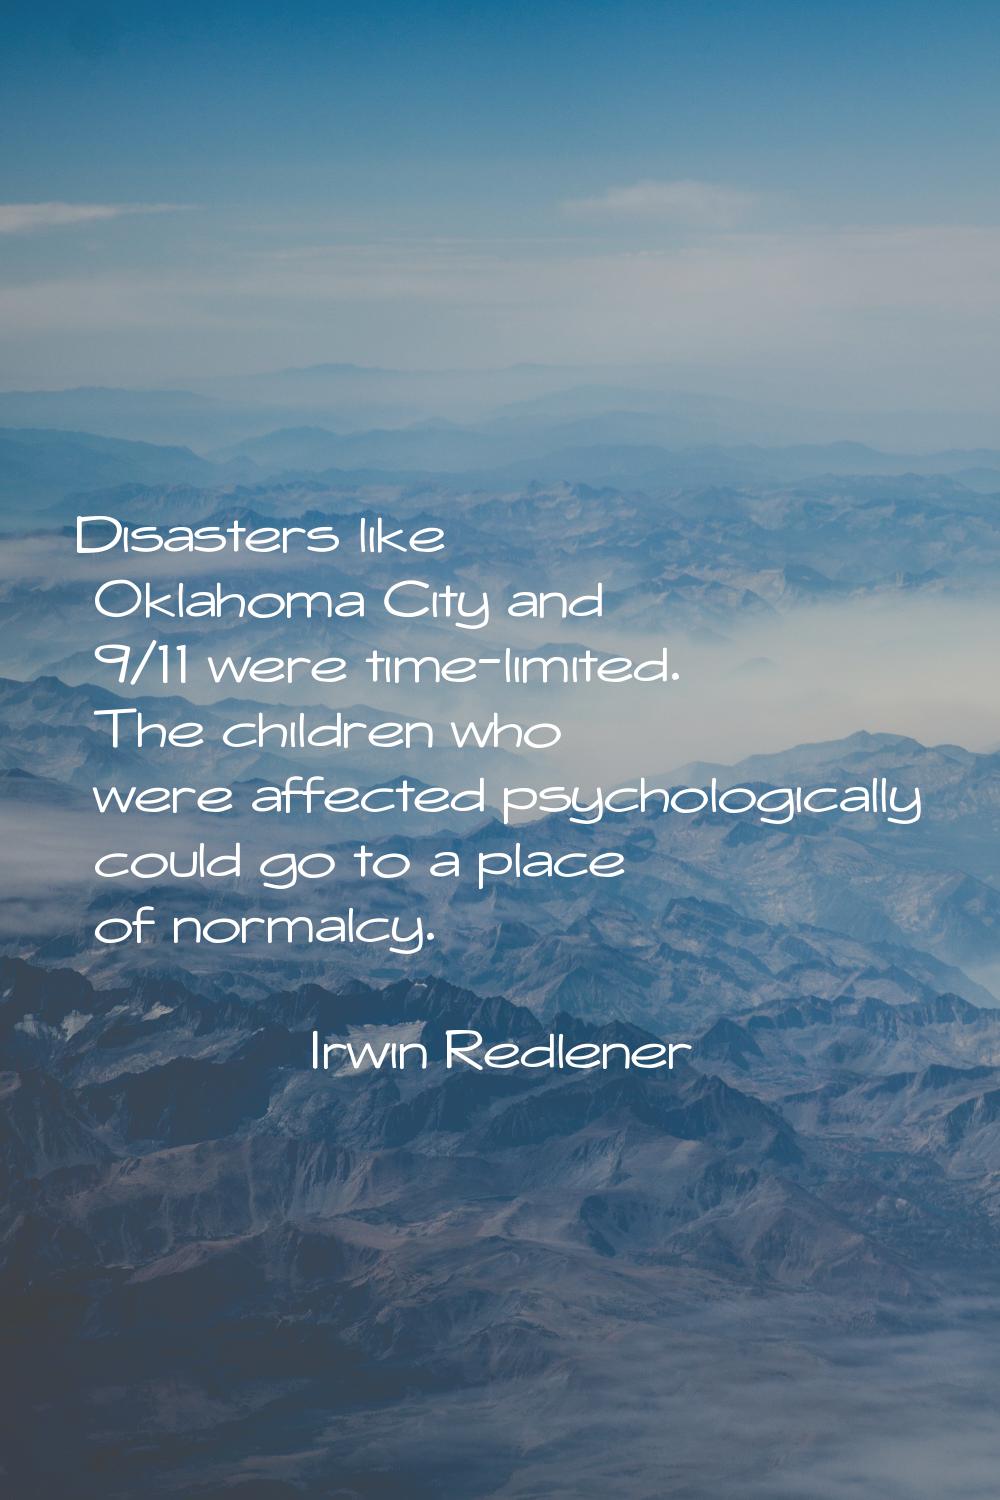 Disasters like Oklahoma City and 9/11 were time-limited. The children who were affected psychologic